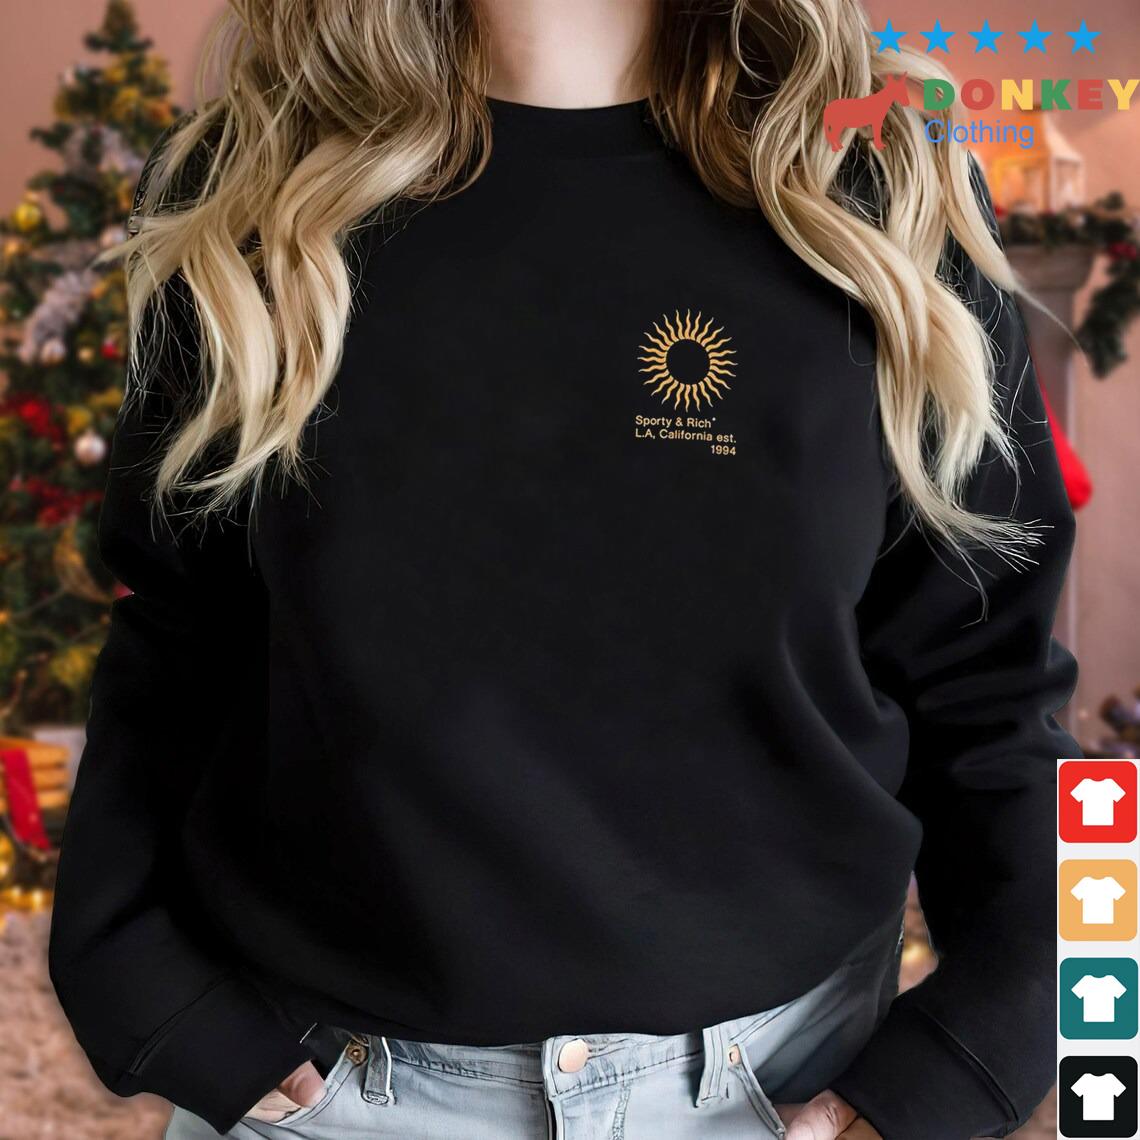 We Wish You A Very Merry Christmas God Jul Sweater